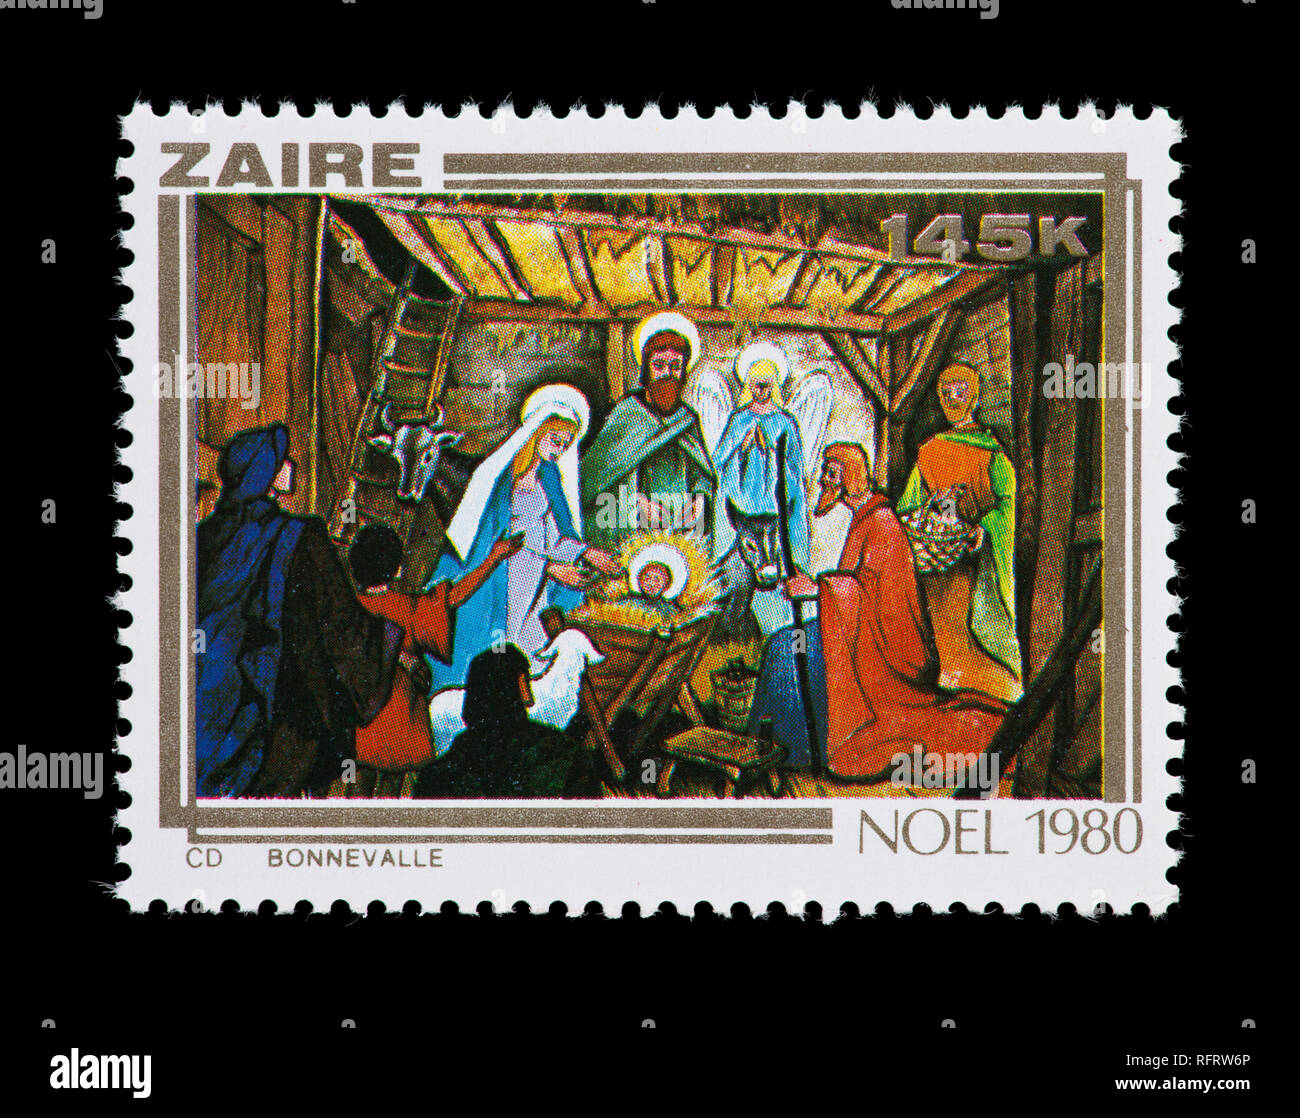 Postage stamp from Zaire depicting a painting of Shepherds and Angels, issued for Christmas. Stock Photo